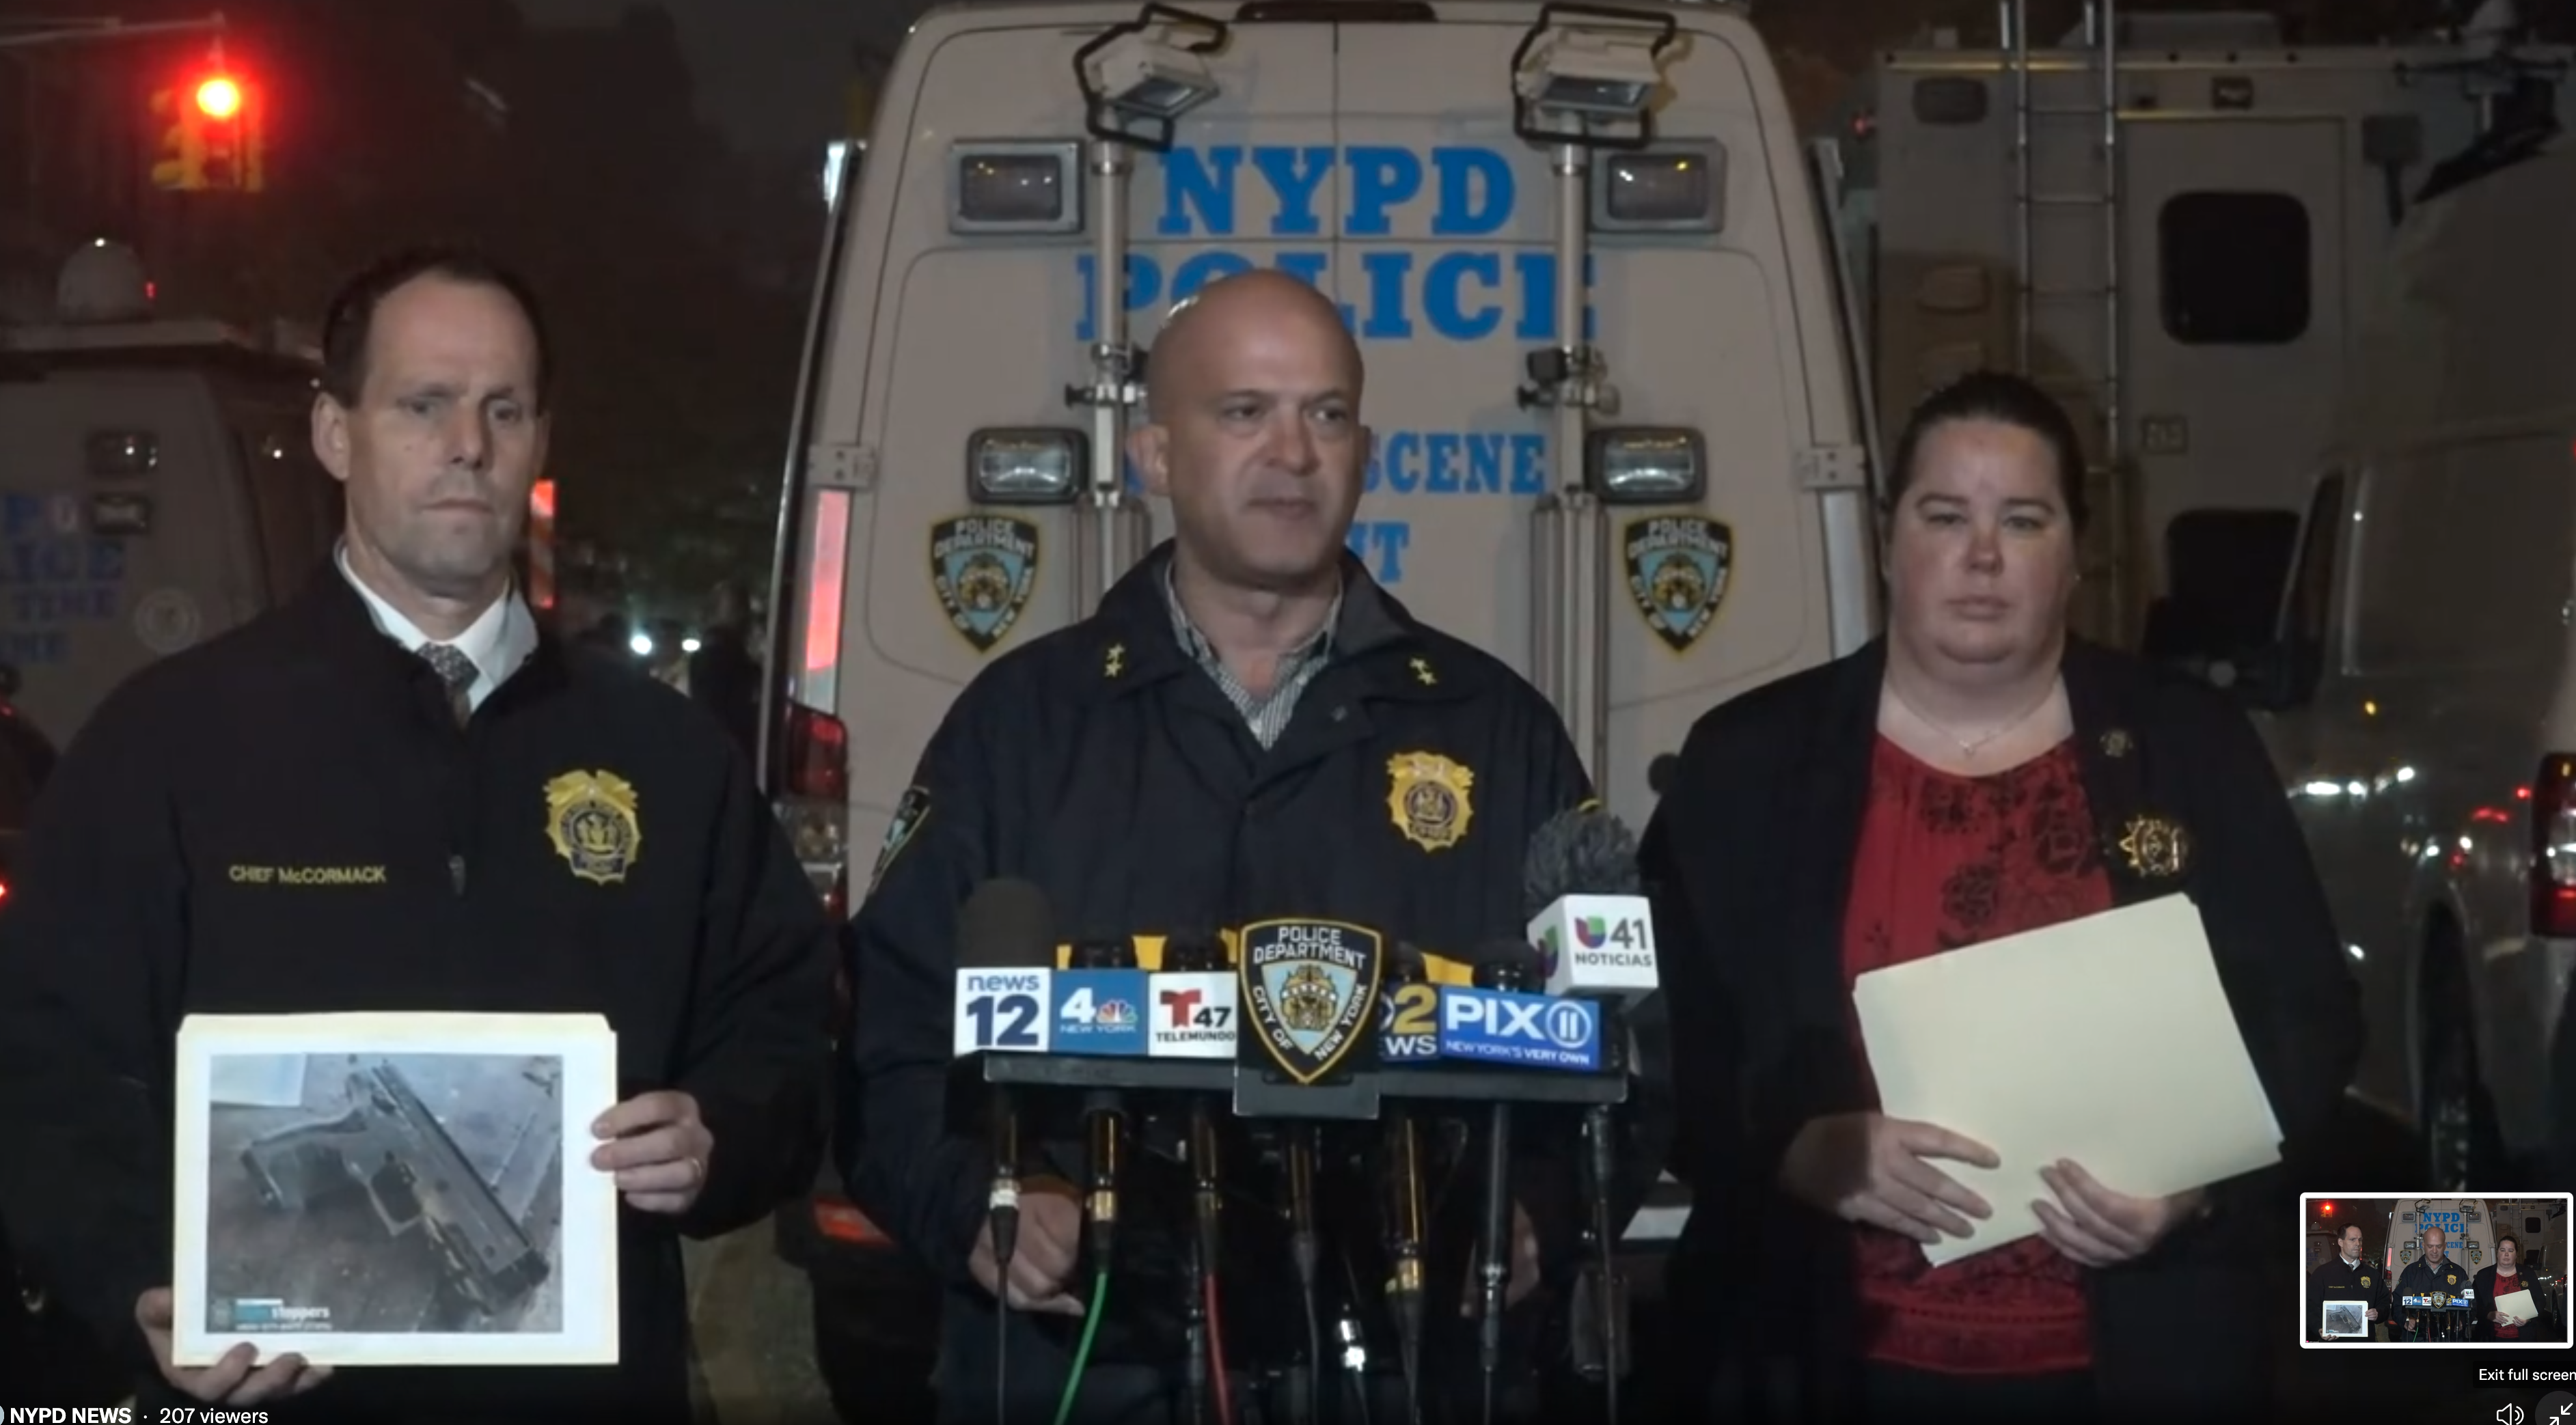 NYPD: Plainclothes officers fatally shoot man after
confrontation in the Bronx